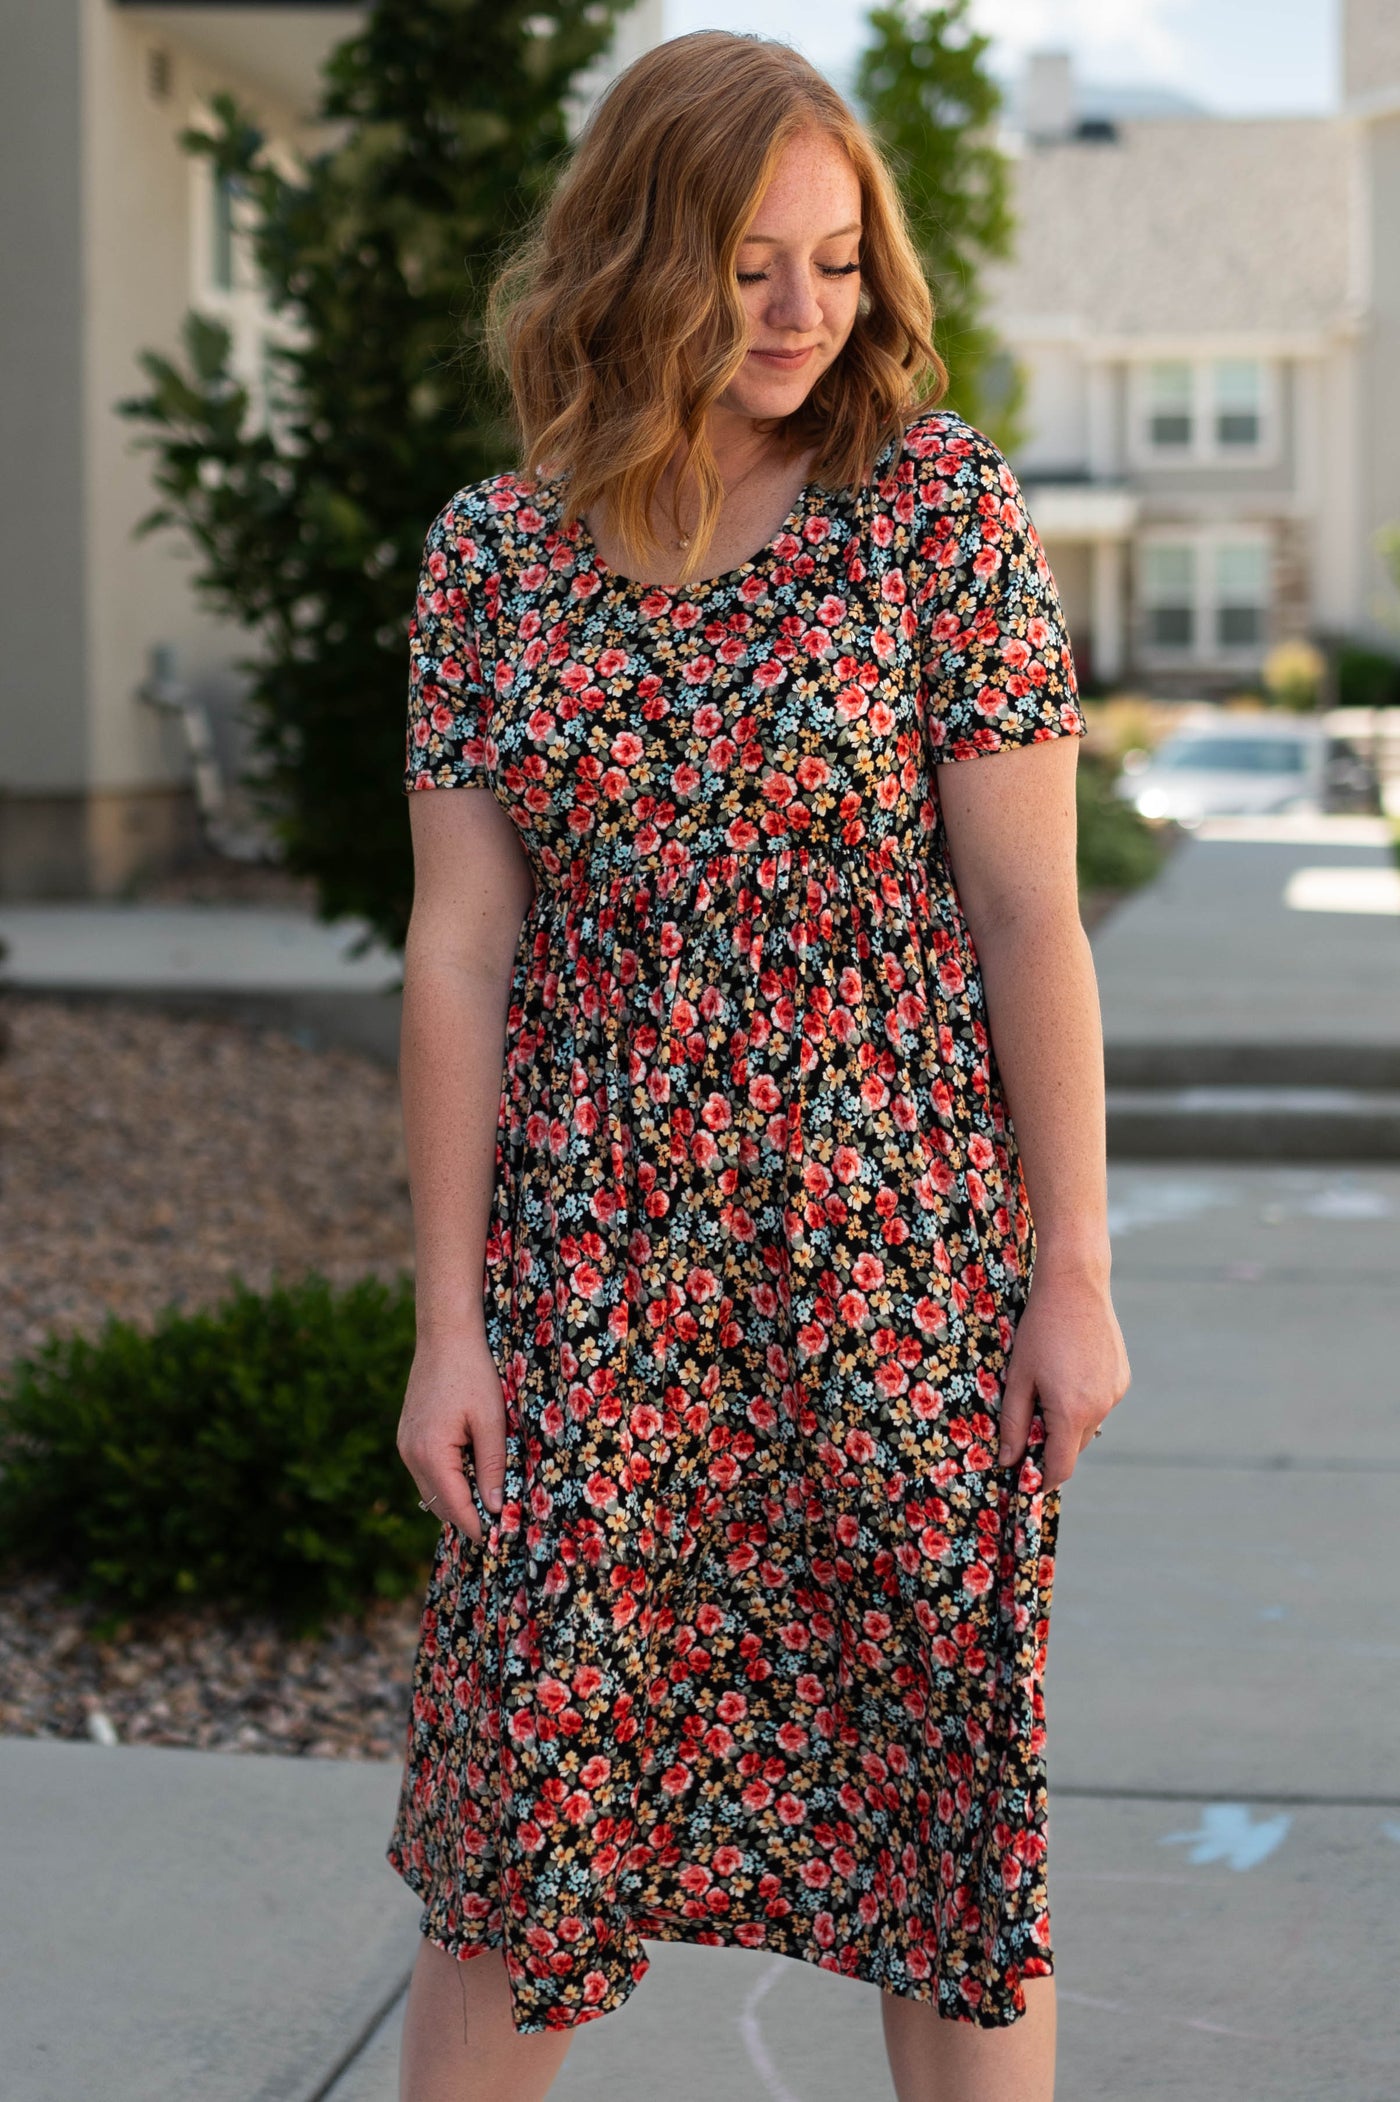 Short sleeve black dress with red flowers